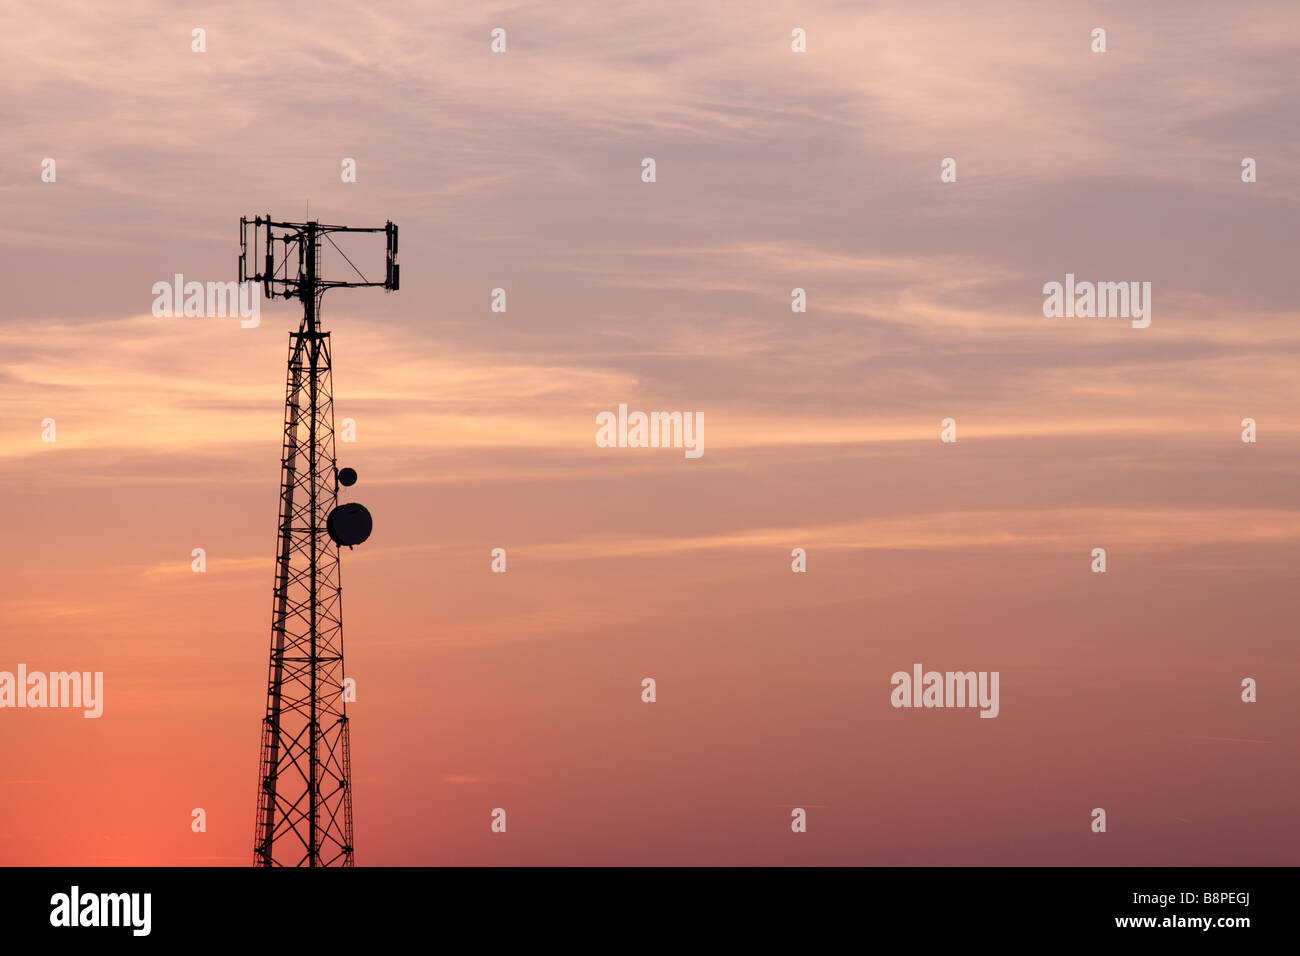 Orange-Pink Cell Phone Tower Silhouette Stock Photo